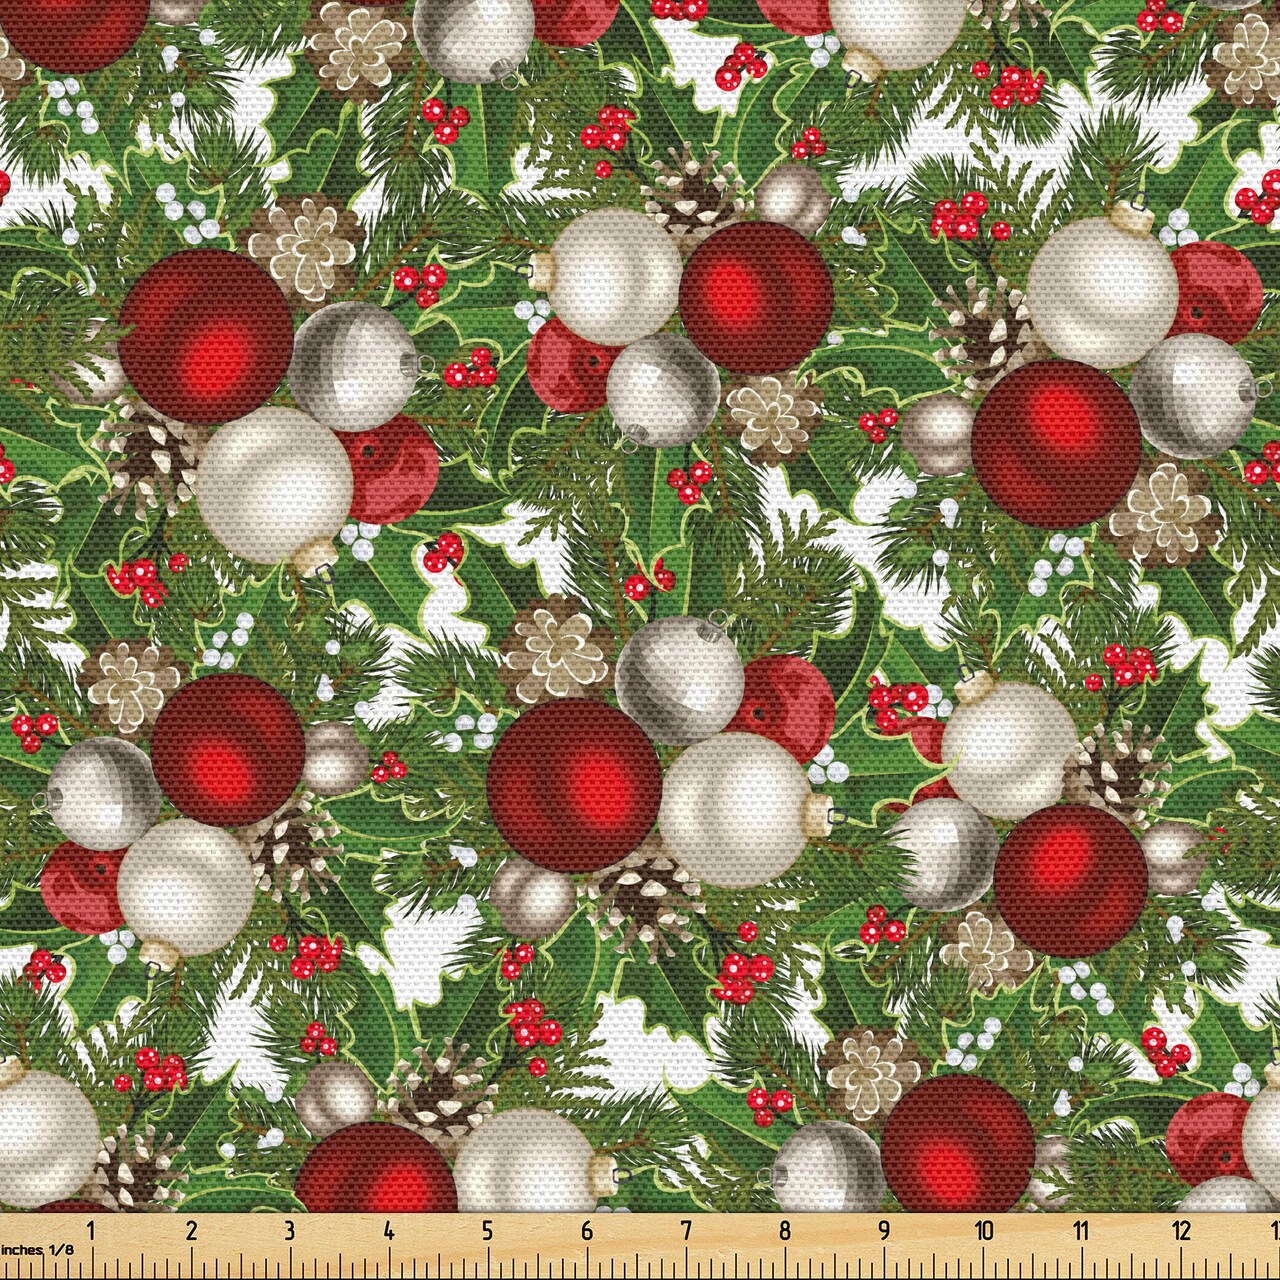 Ambesonne Christmas Fabric by the Yard, Pine Fir Cones Balls and Coniferous Tree Leaves Holly Berry Old Fashioned, Decorative Fabric for Upholstery and Home Accents, 5 Yards, Red Green Grey